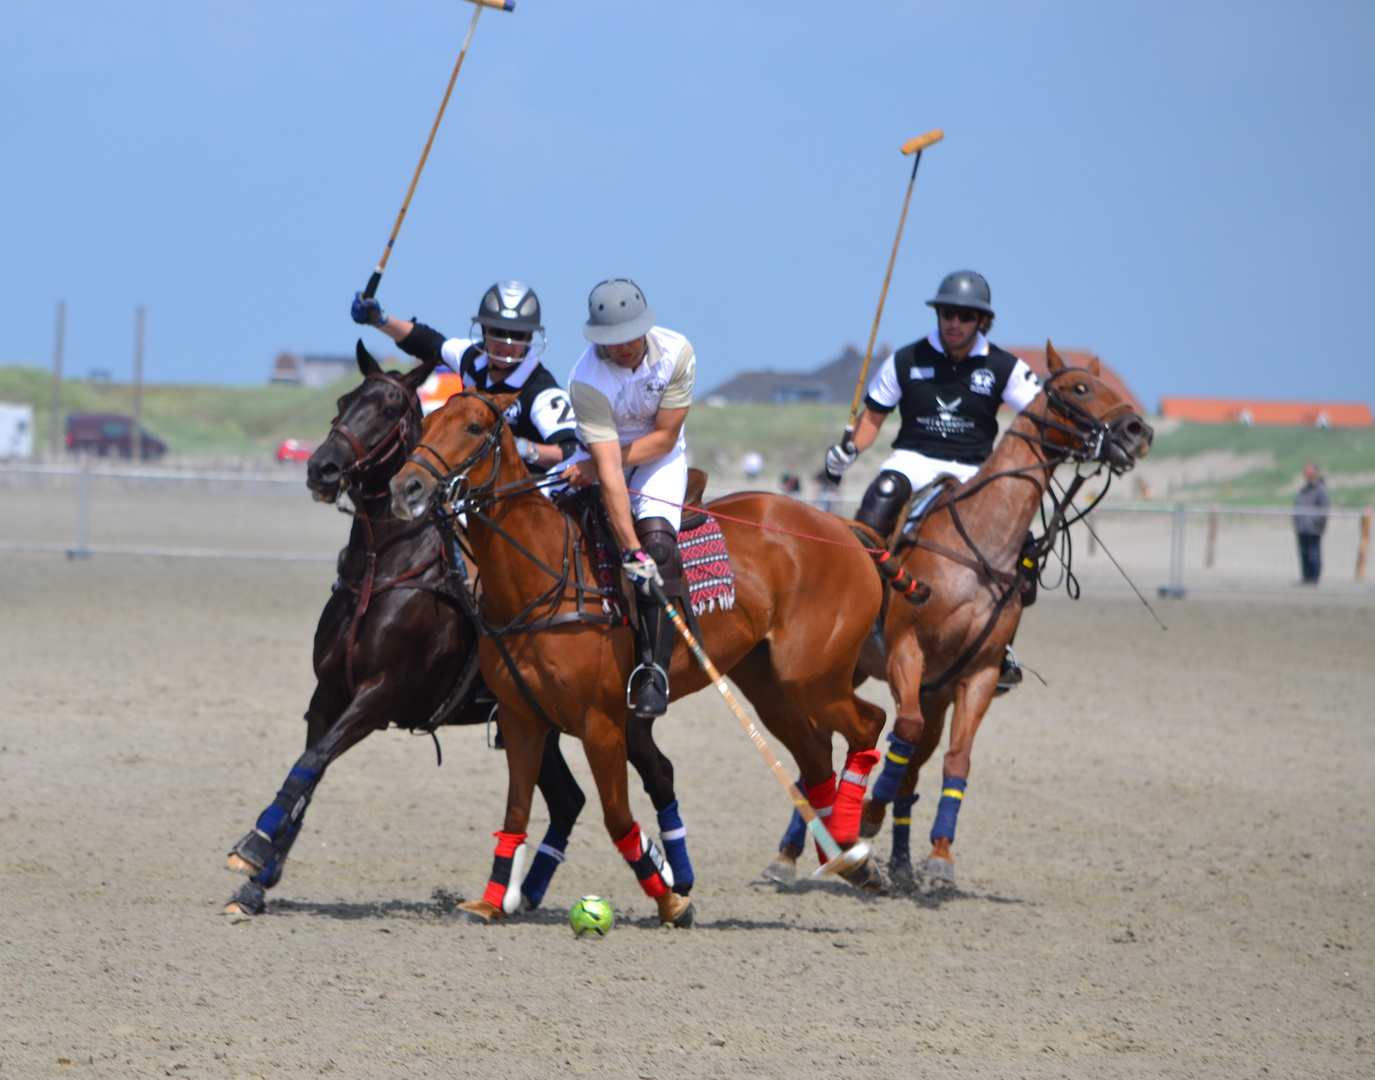 Polo Tunier St. Peter - Ording